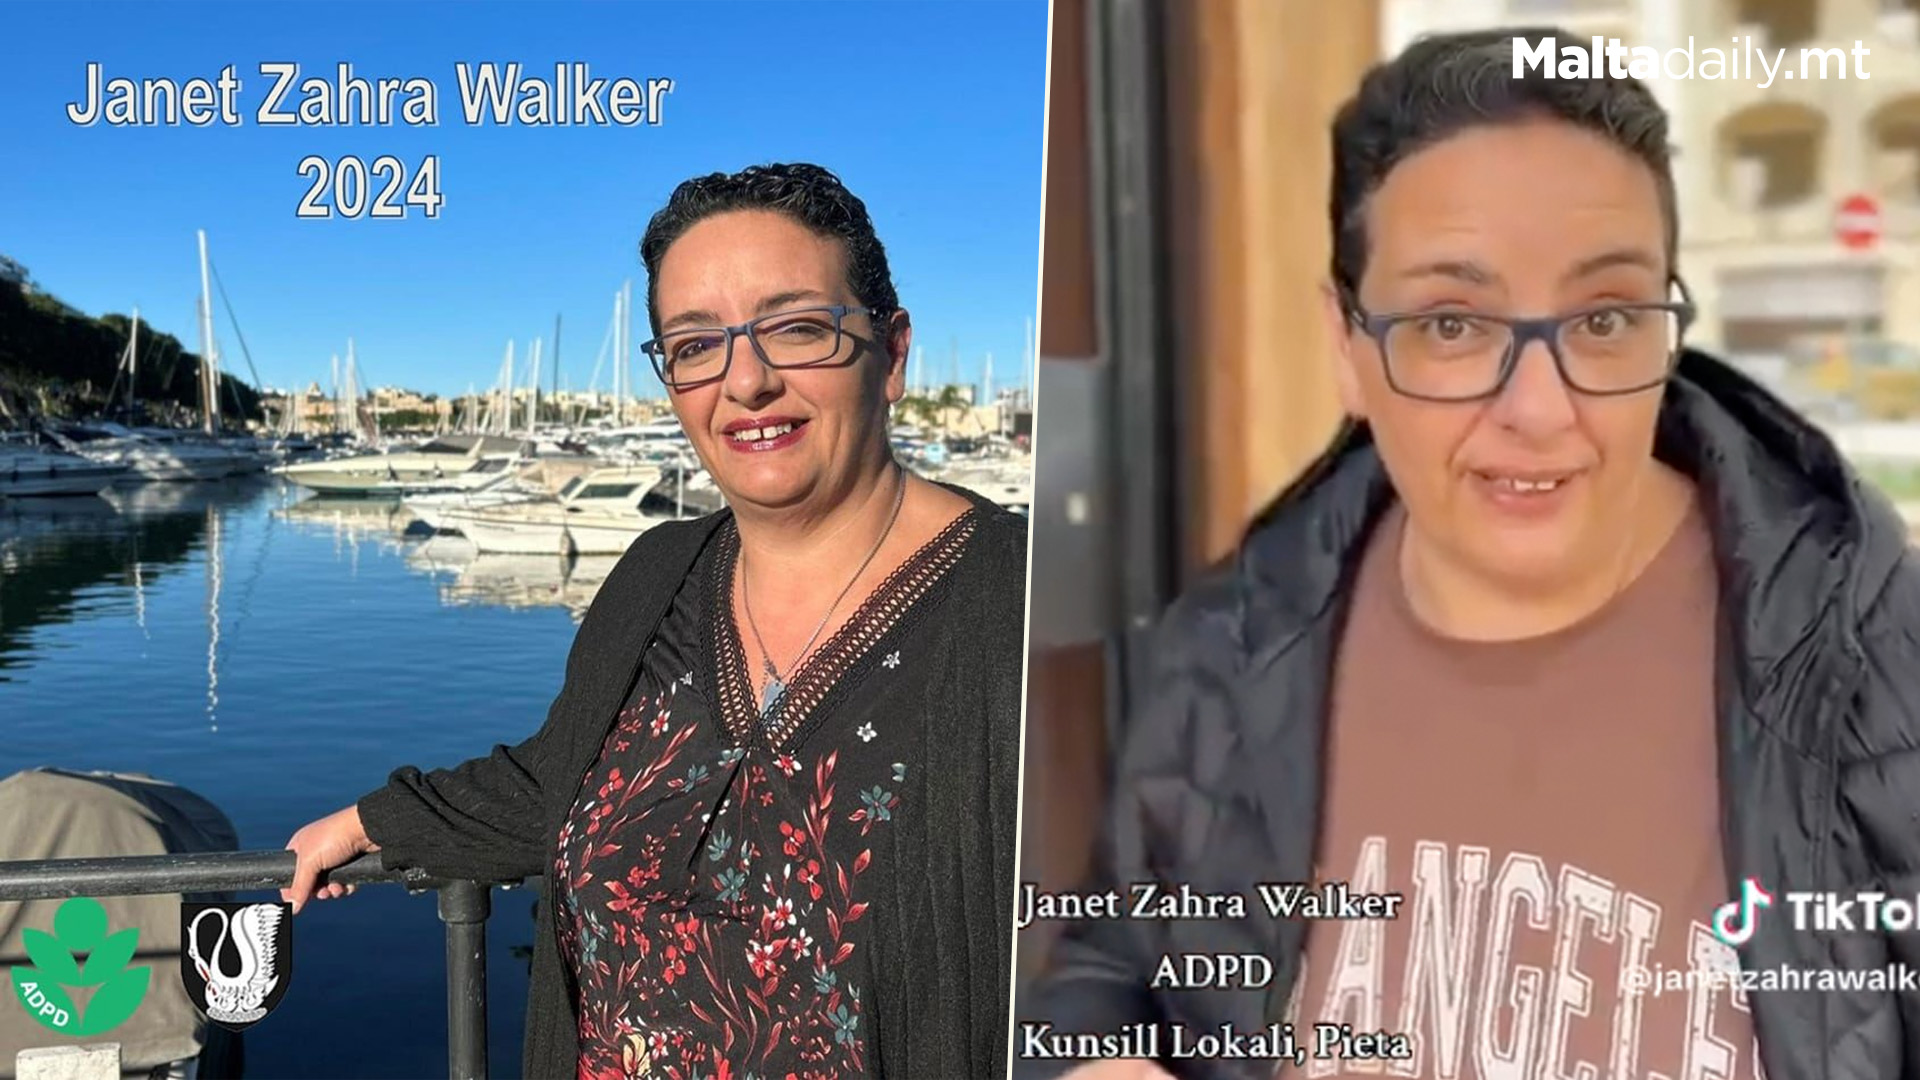 Janet Zahra Walker To Contest Local Council Elections With ADPD